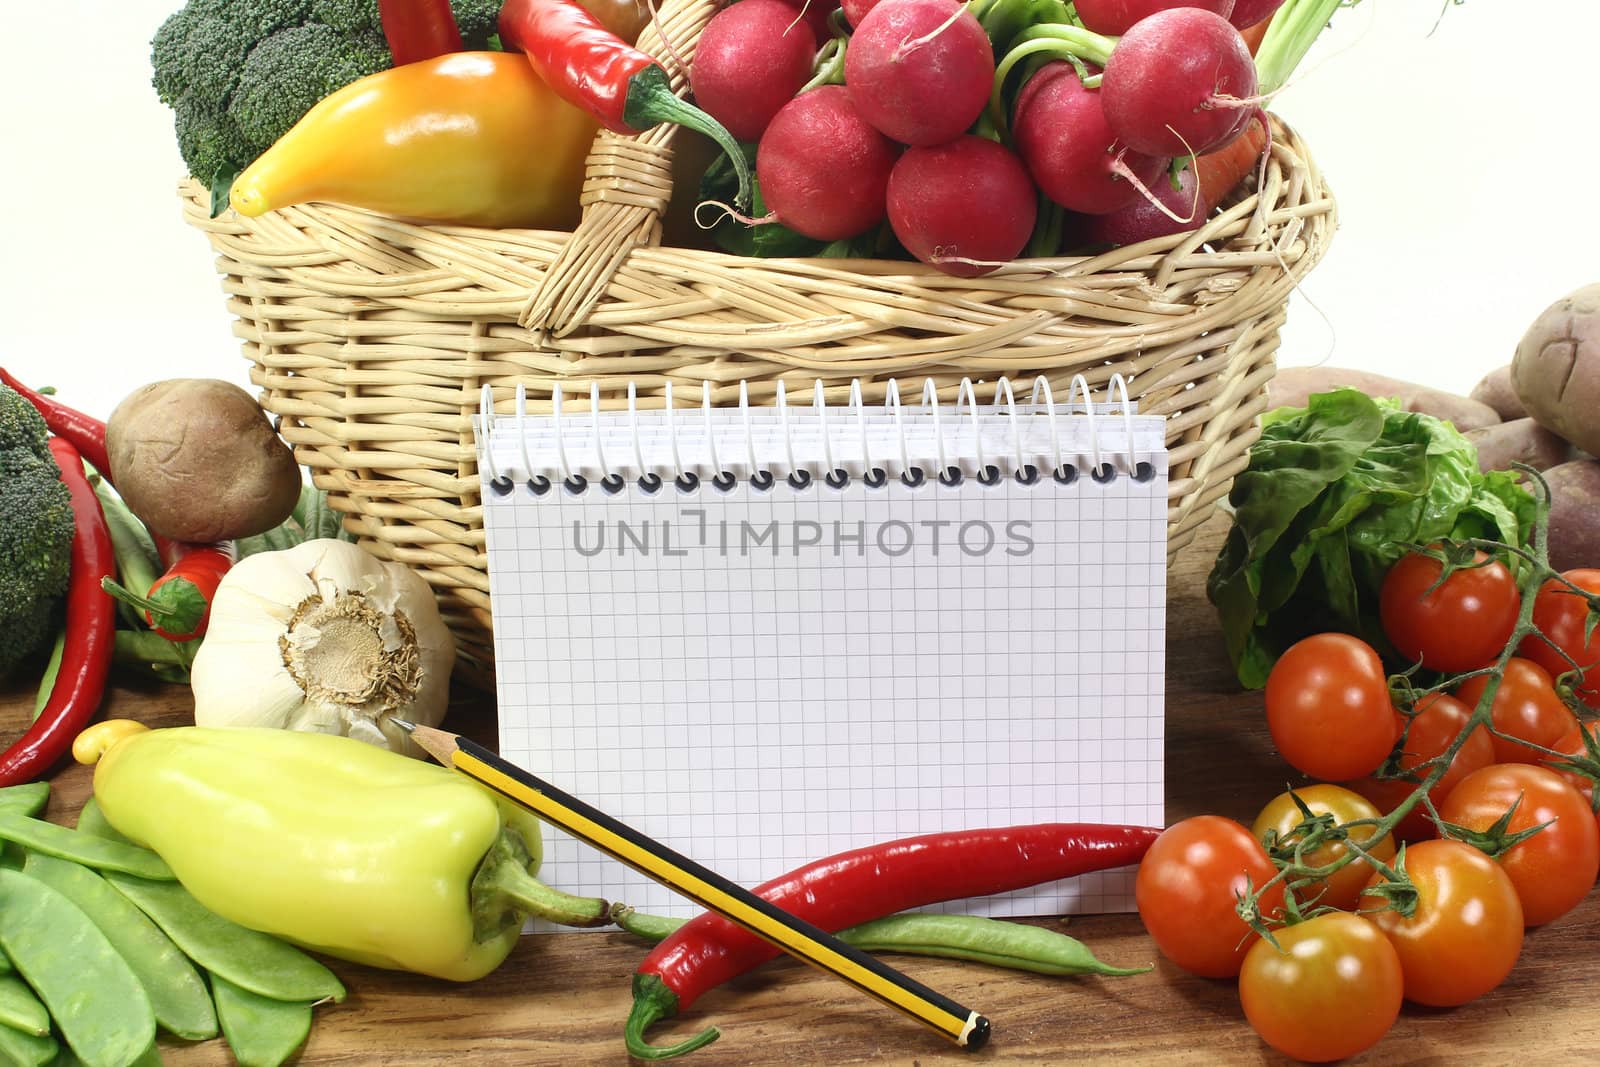 plaid shopping list with pencil, vegetables and basket on a wooden ground